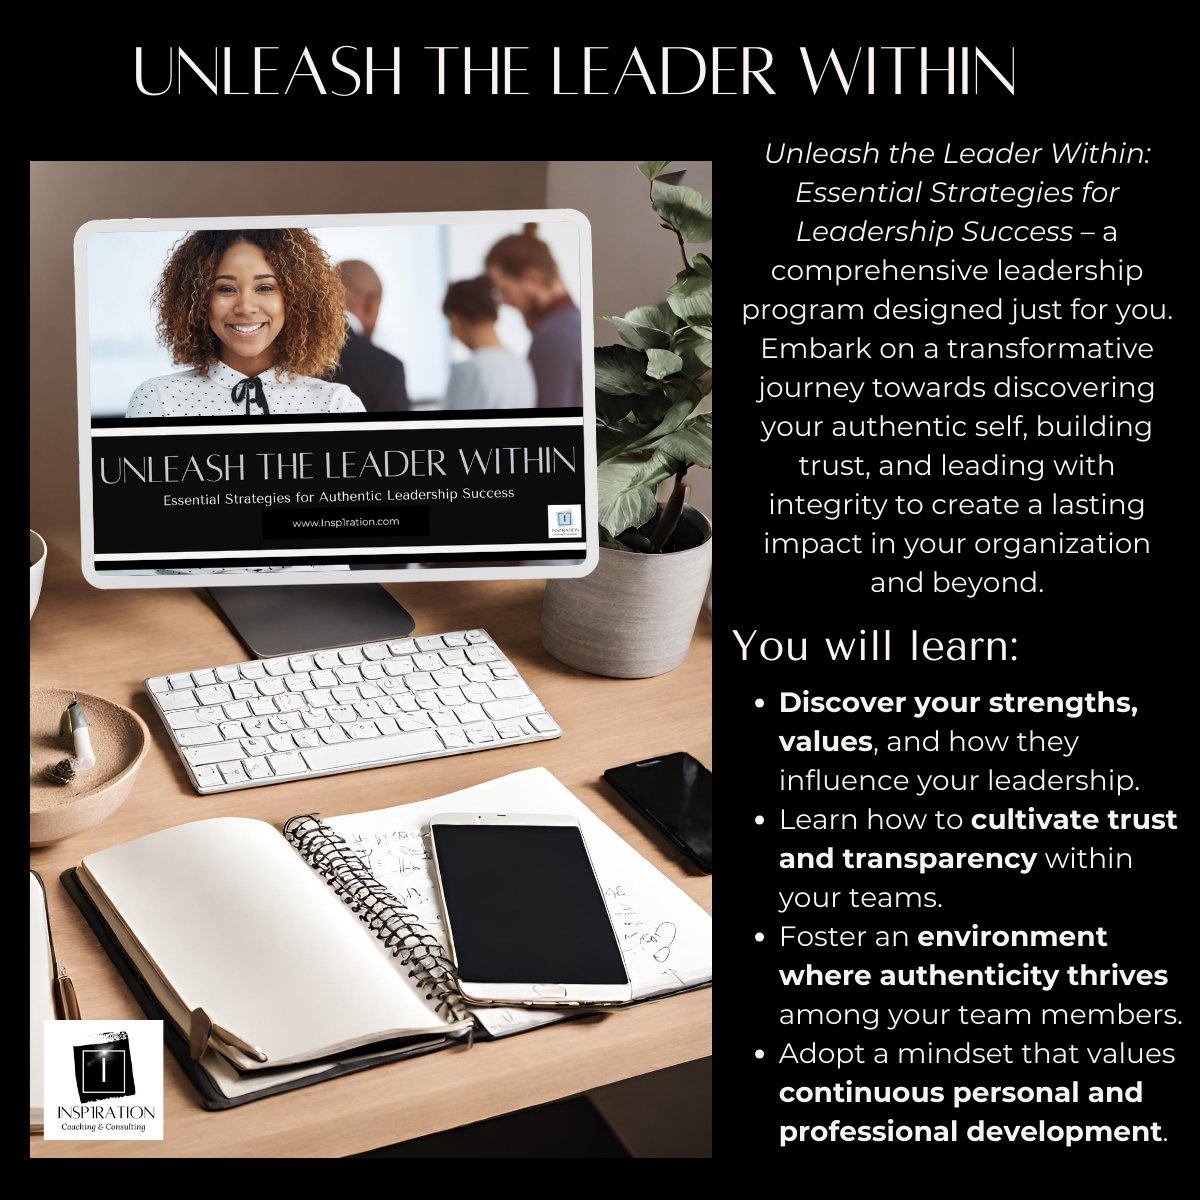 Our program, 'Unleash the Leader Within,' is your pathway out of the rut and into your full potential. Discover how to enhance your strengths and polish your skills for a brighter professional future. 

Join us here:insp1ration.com/unleashthelead… #LeadershipGrowth #UnleashPotential